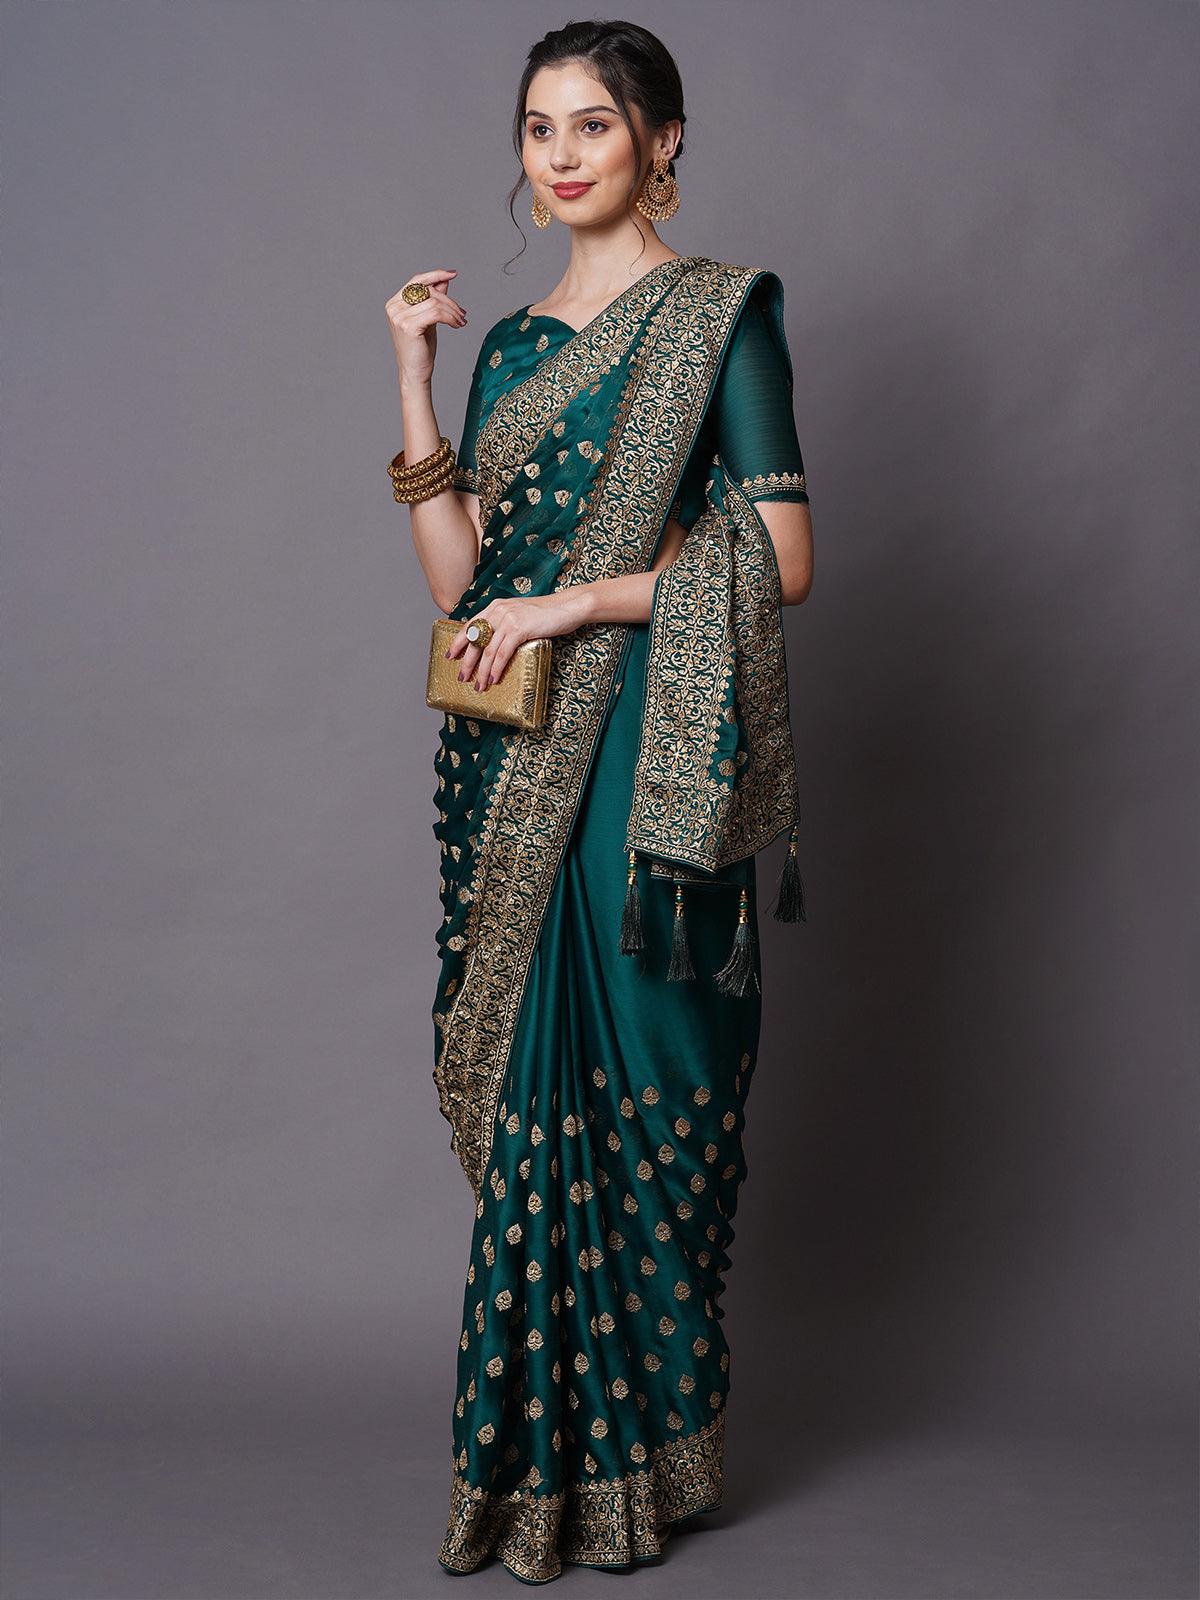 Women's Teal Blue Party Wear Satin Chiffon Embelished Saree With Unstitched Blouse - Odette